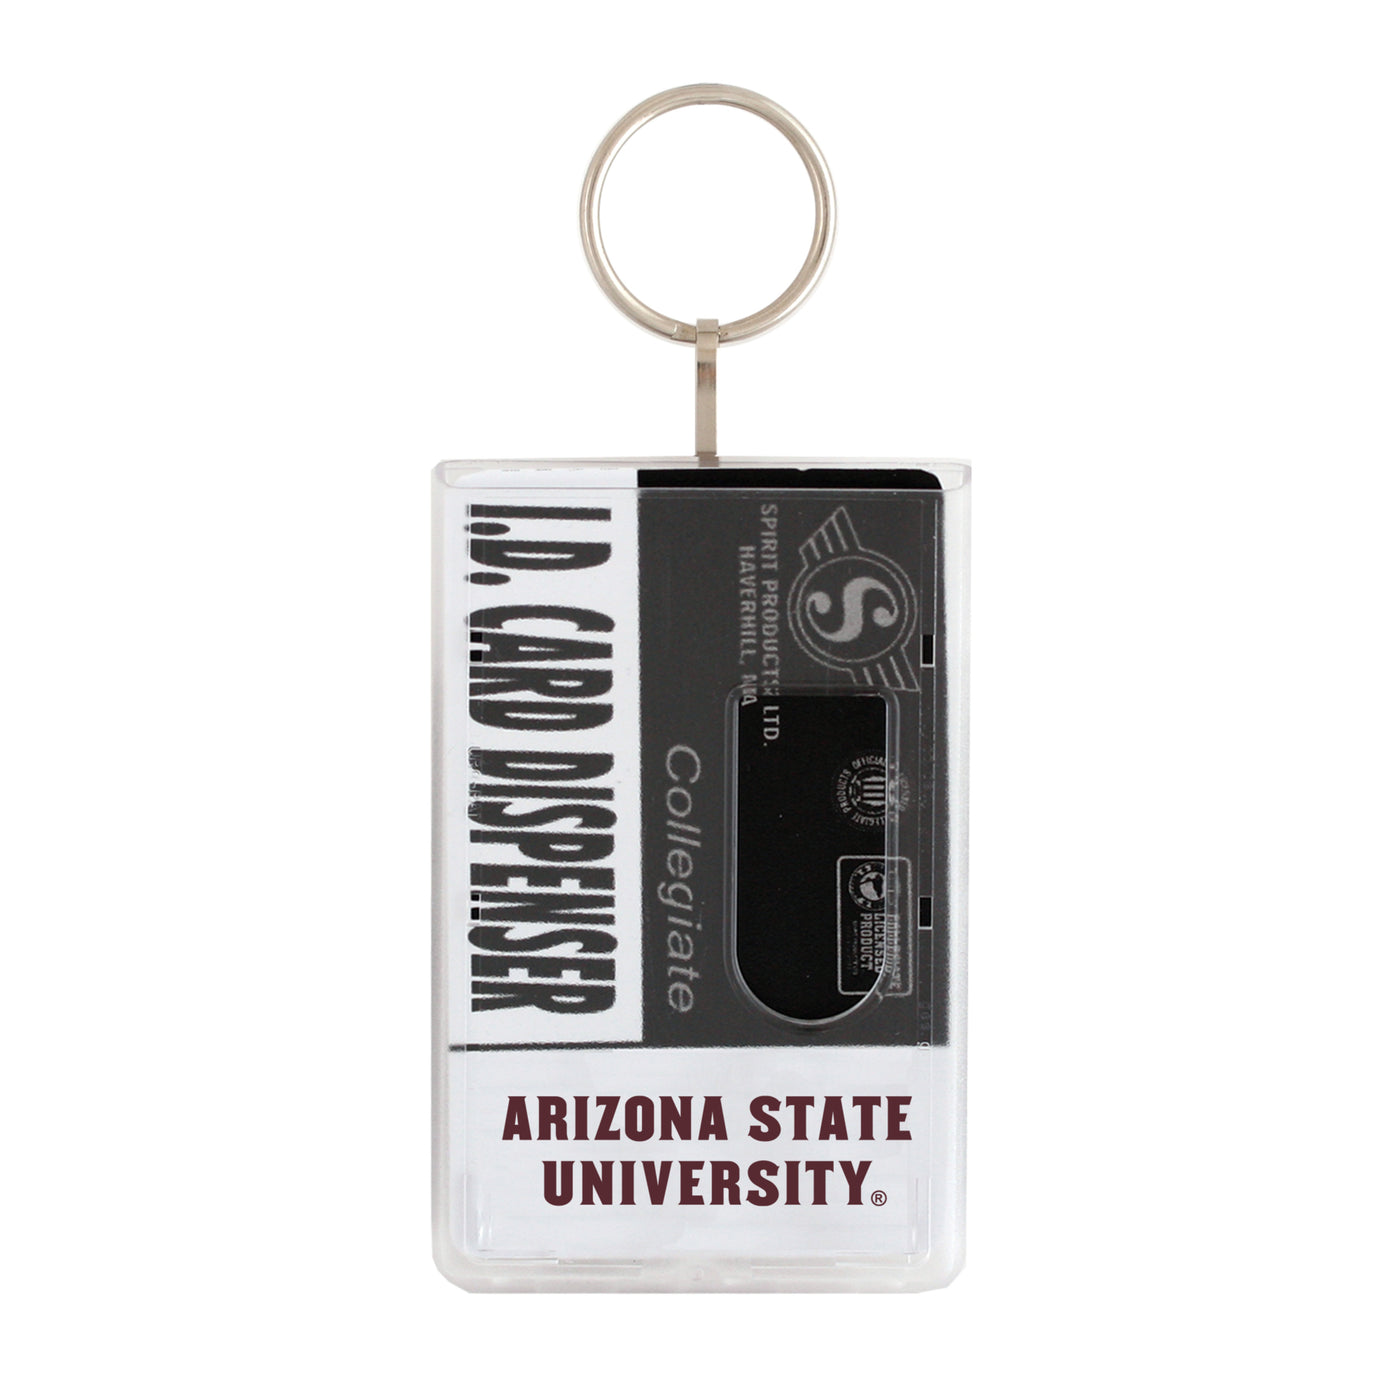 ASU ID card dispenser with 'Arizona State University lettering at the base, a thumb hole for card sliding, and a keychain attachment